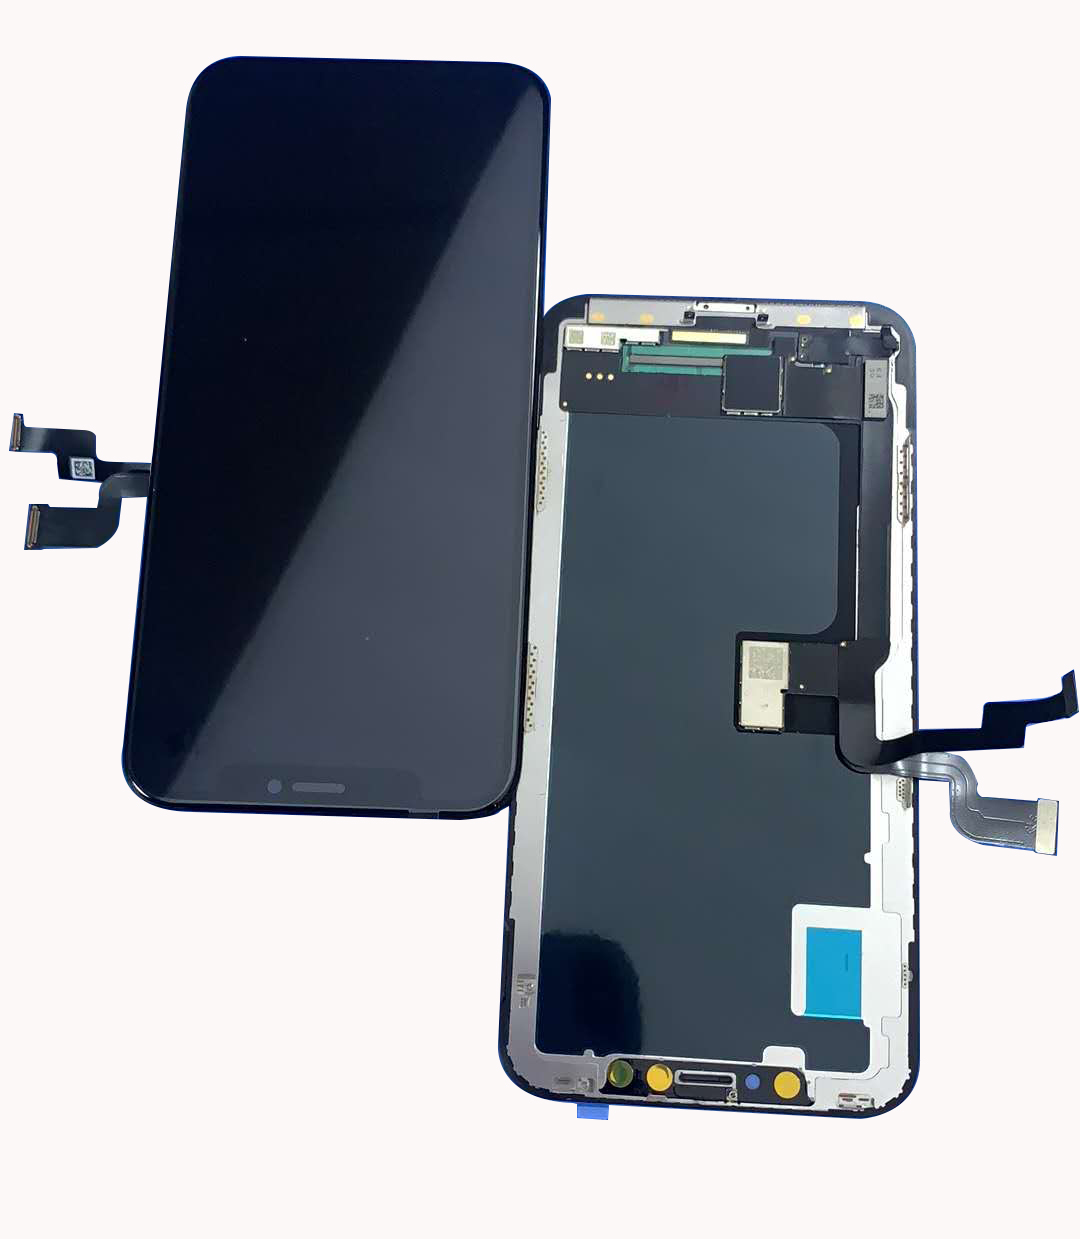 INCELL Display screen replacement assembly for iPhone X XR XS MAX 11 12 pro max 11pro 12pro 13pro 13 mini LCD